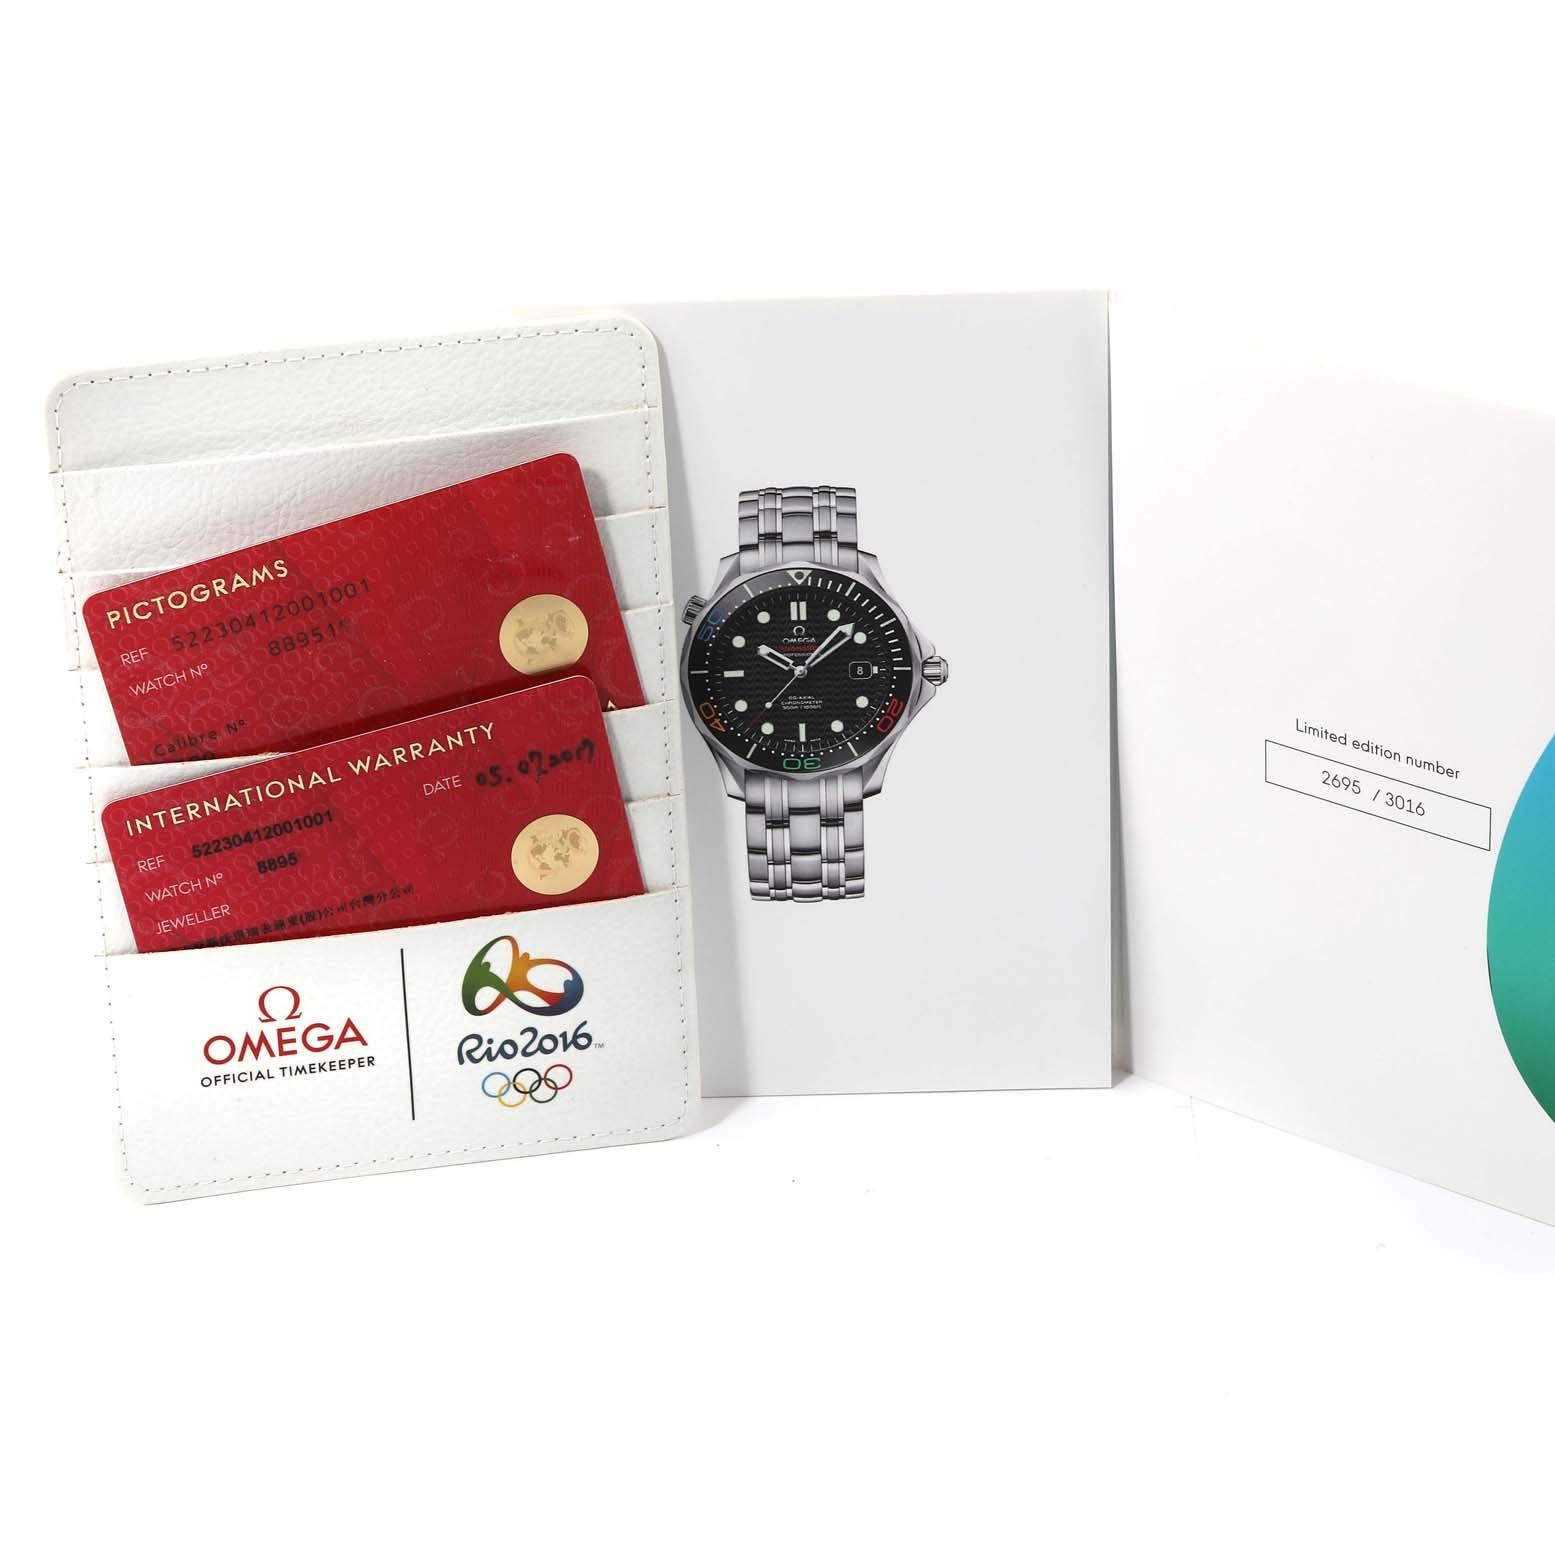 Omega Seamaster Olympic Rio 2016 Limited Edition Steel Mens Watch Box Card For Sale 4